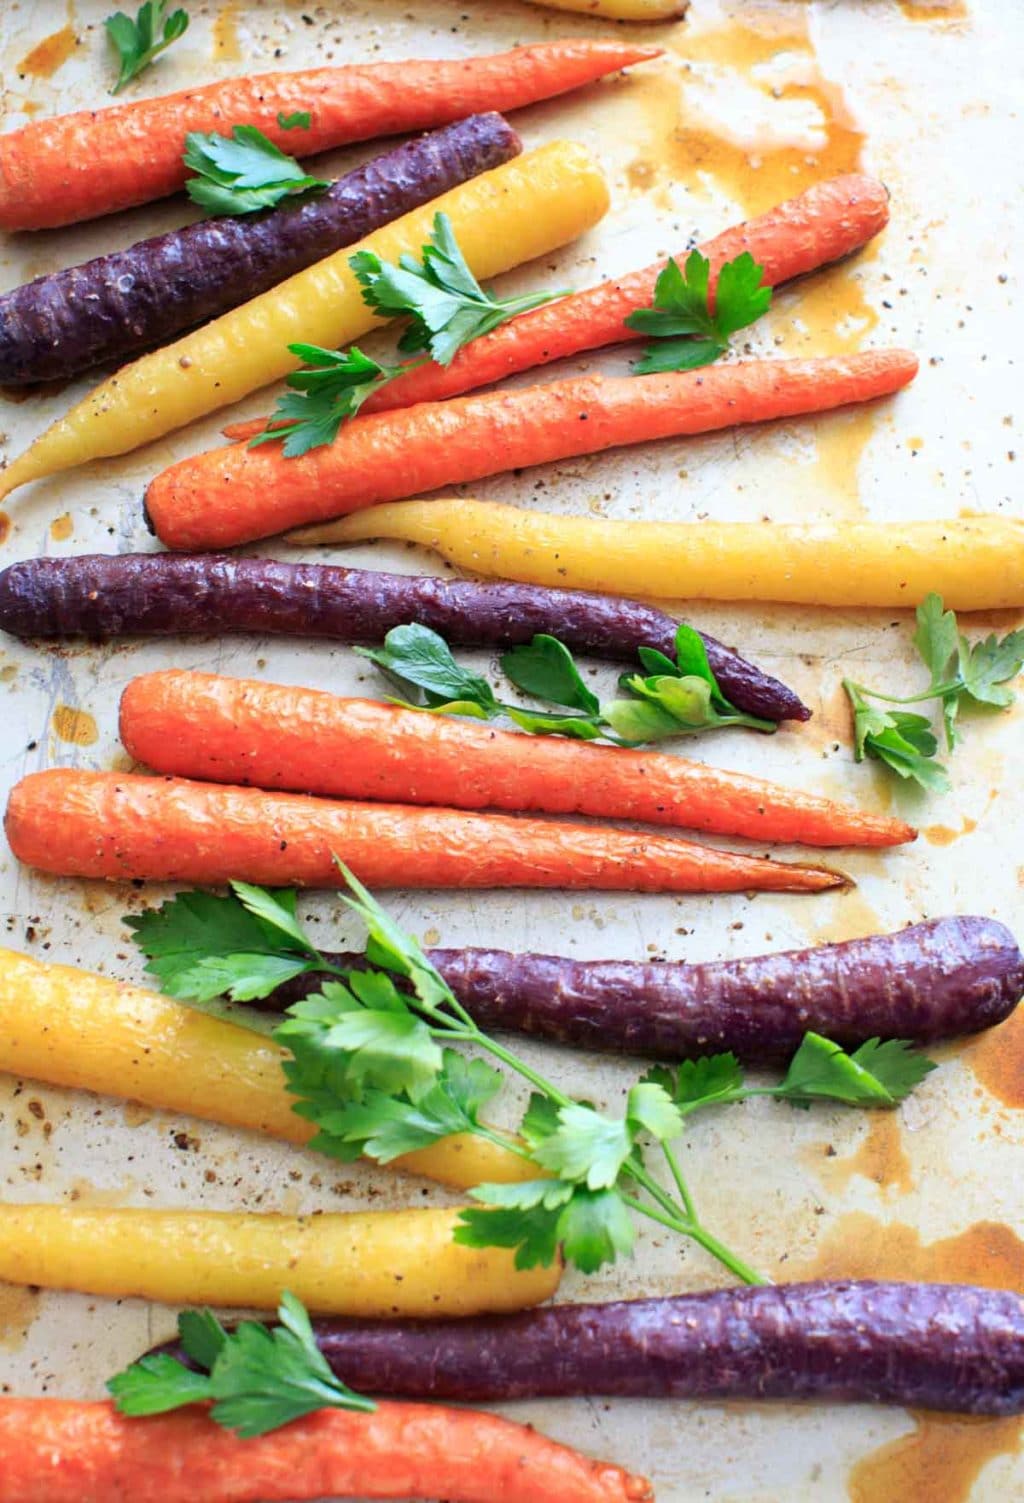 Maple roasted carrots are an easy vegetable side dish that you can throw together for any meal. Vegan and gluten-free, 5 ingredients or less. (Picture is after roasting with fresh parsley.)